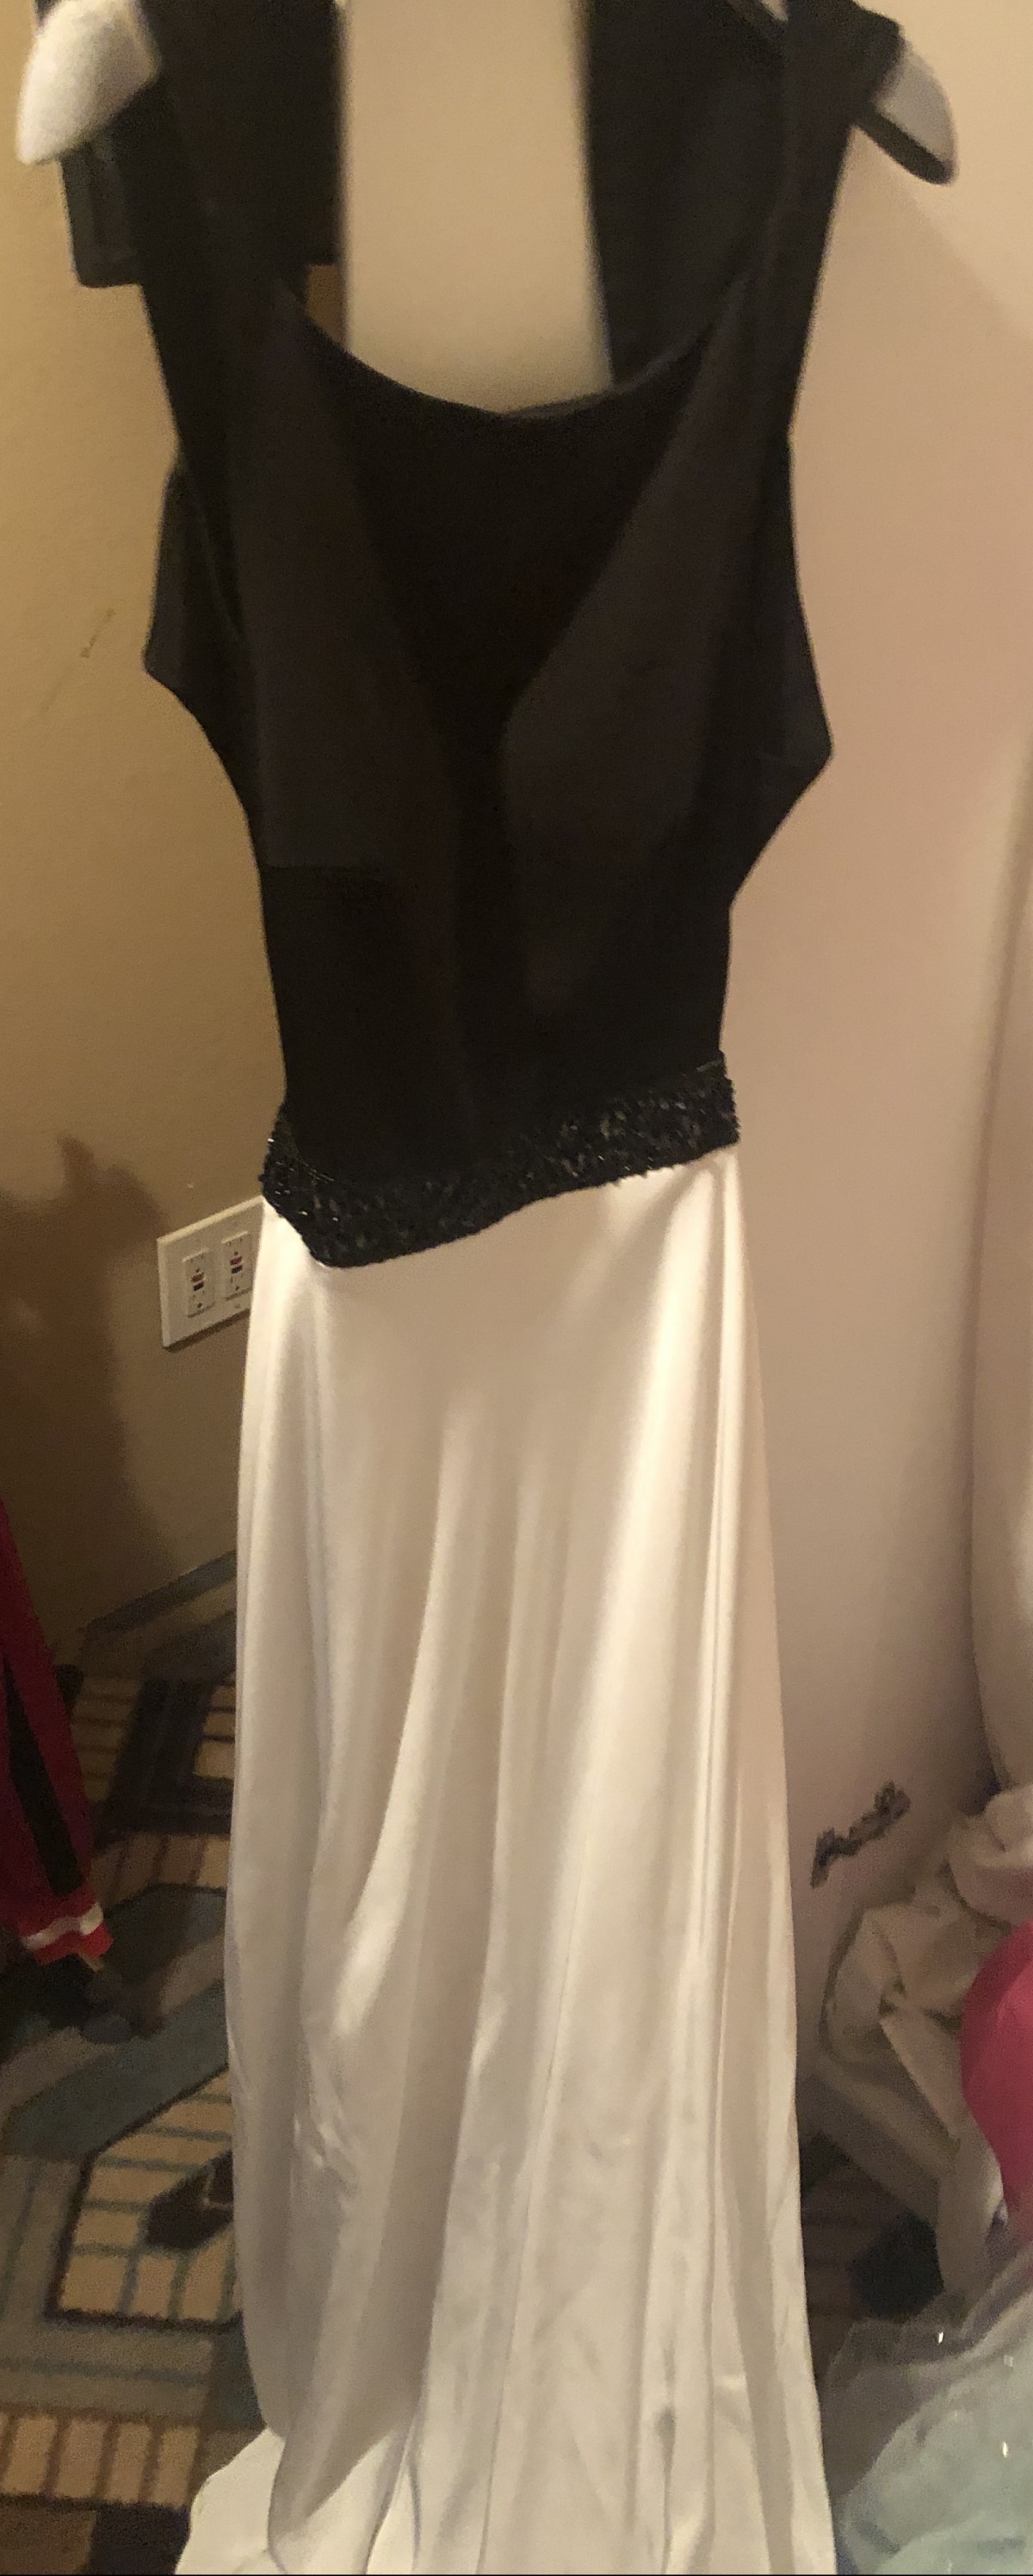 New Black and White Gown by Alyce